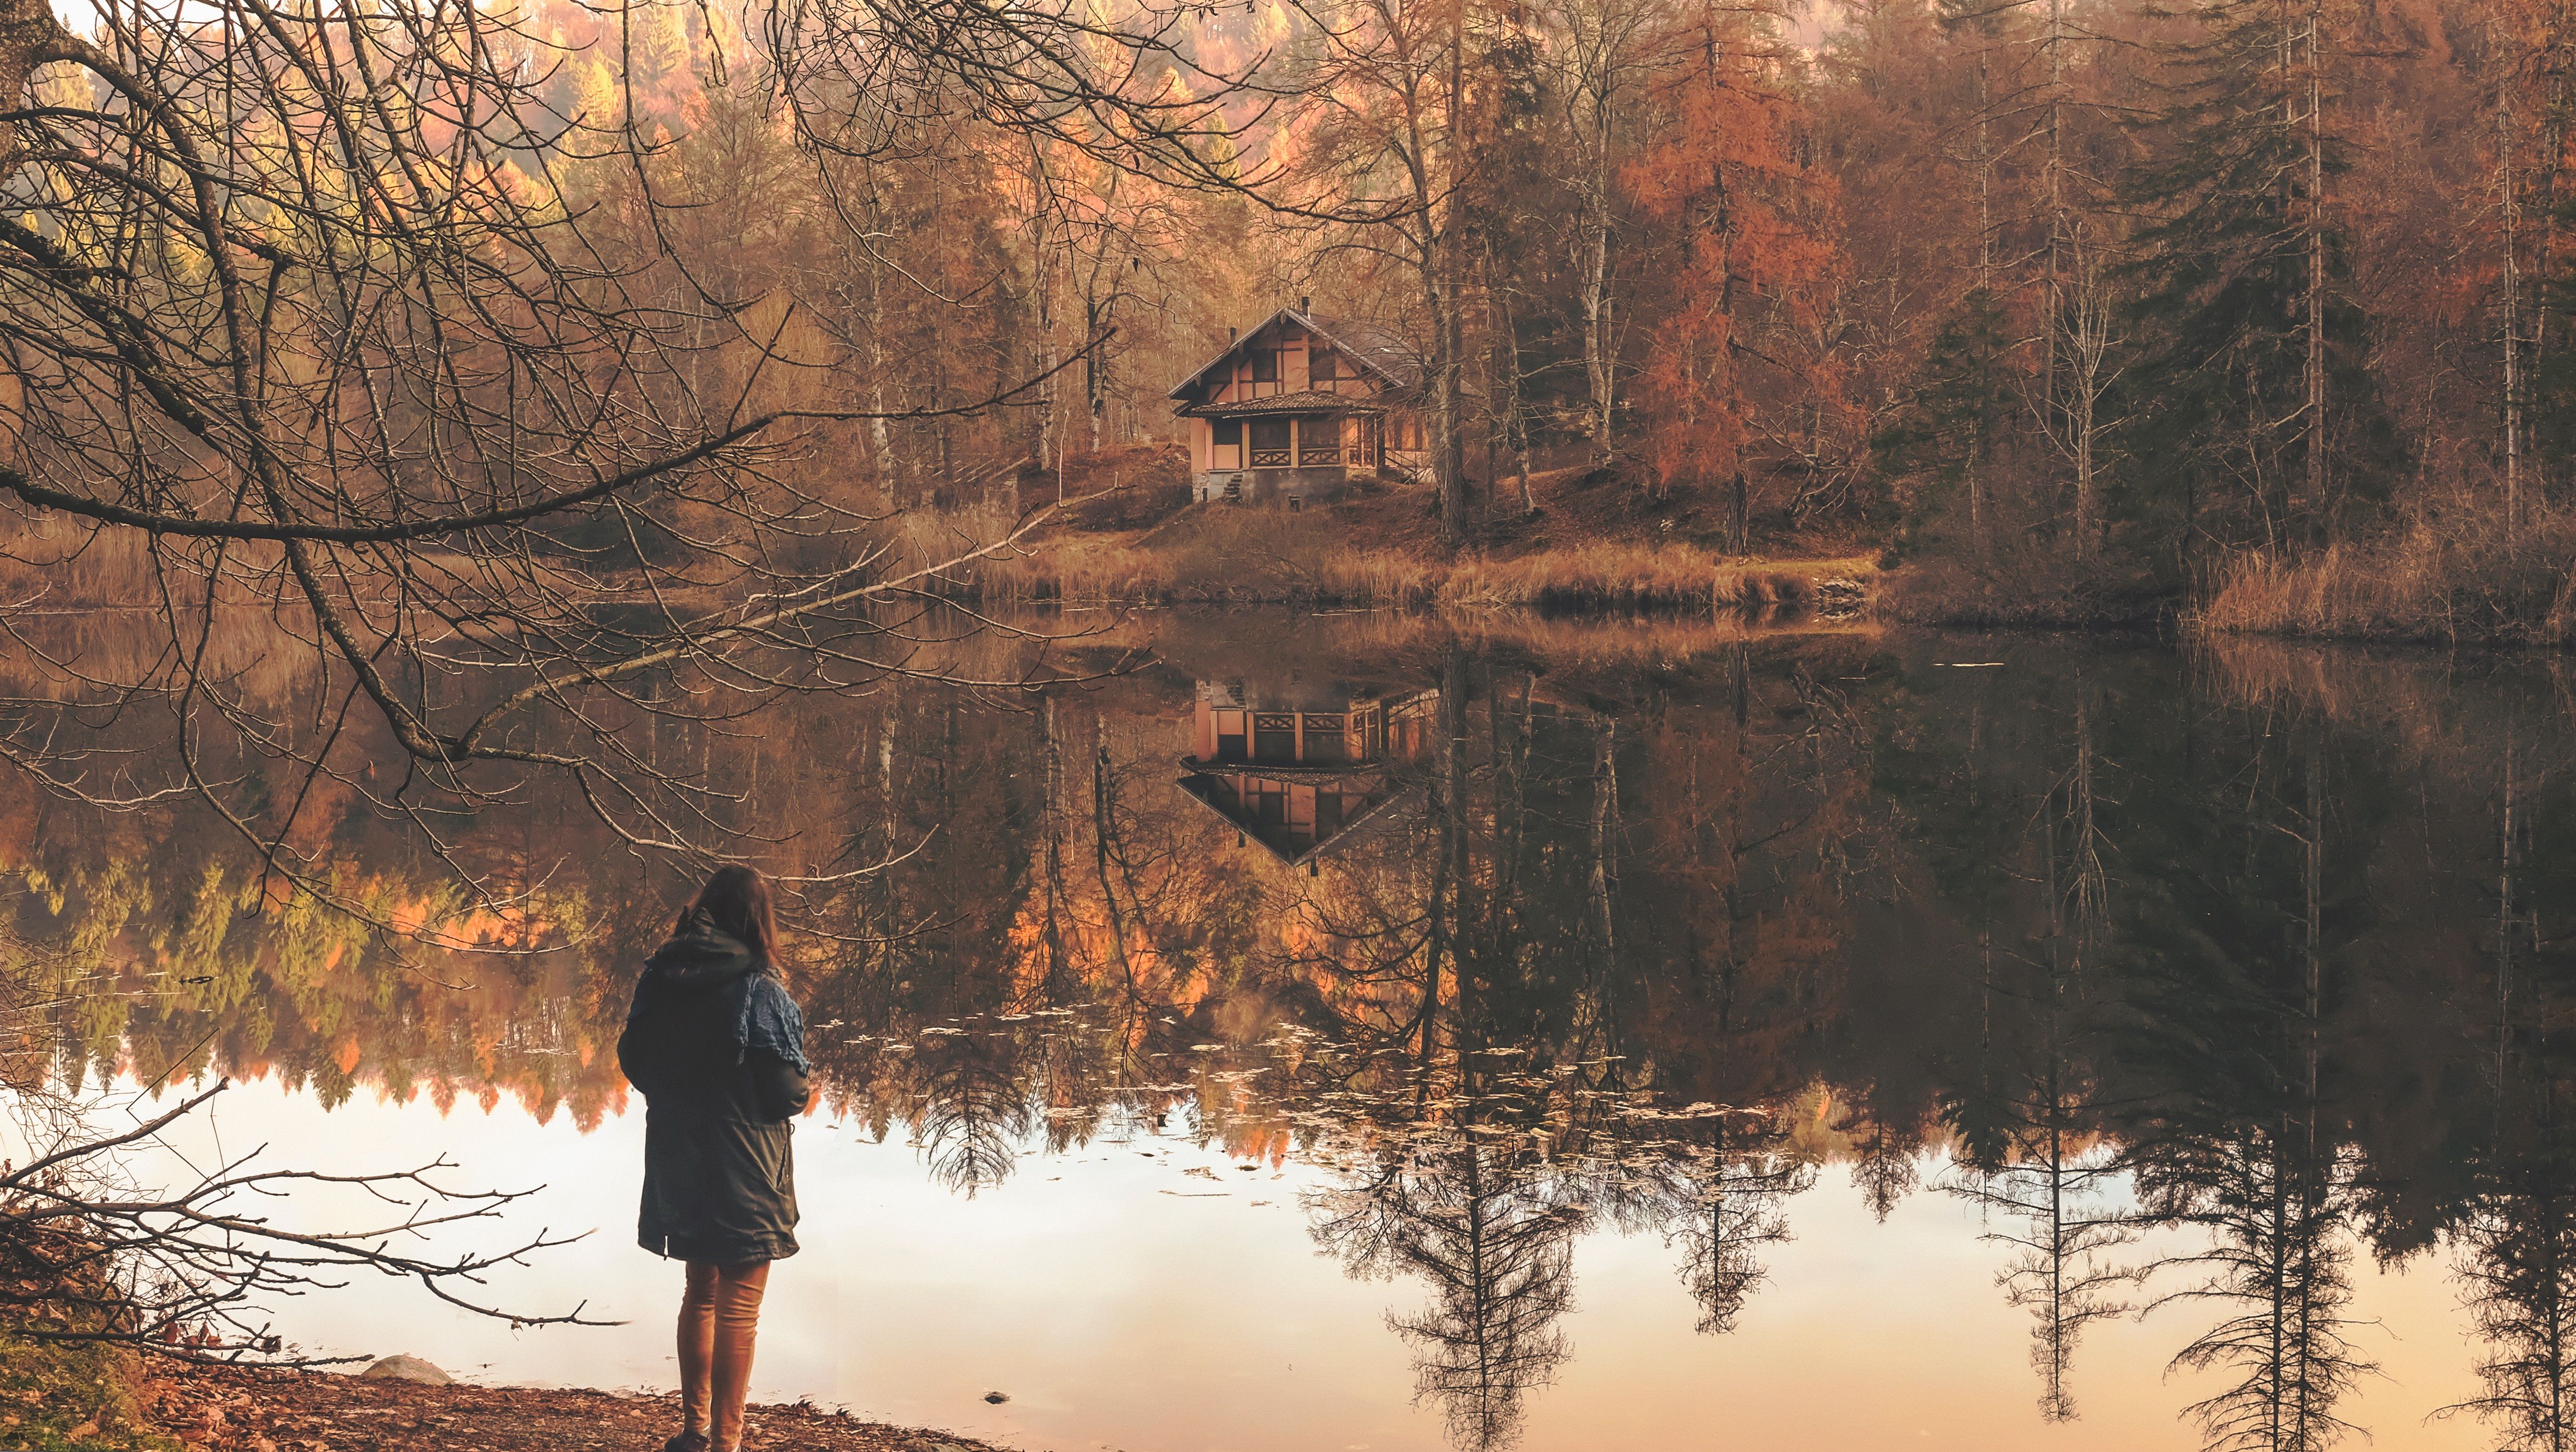 4722x2662 #autumnal, #color, #forest, #autumn, #lady, #explore, # lakeside, #woman, #female, #lake side, #tree, #building, #reflection, #looking out, #cabin, #fall, #standing, #person, #house, #lake, #PNG image. Mocah.org HD Desktop Wallpaper